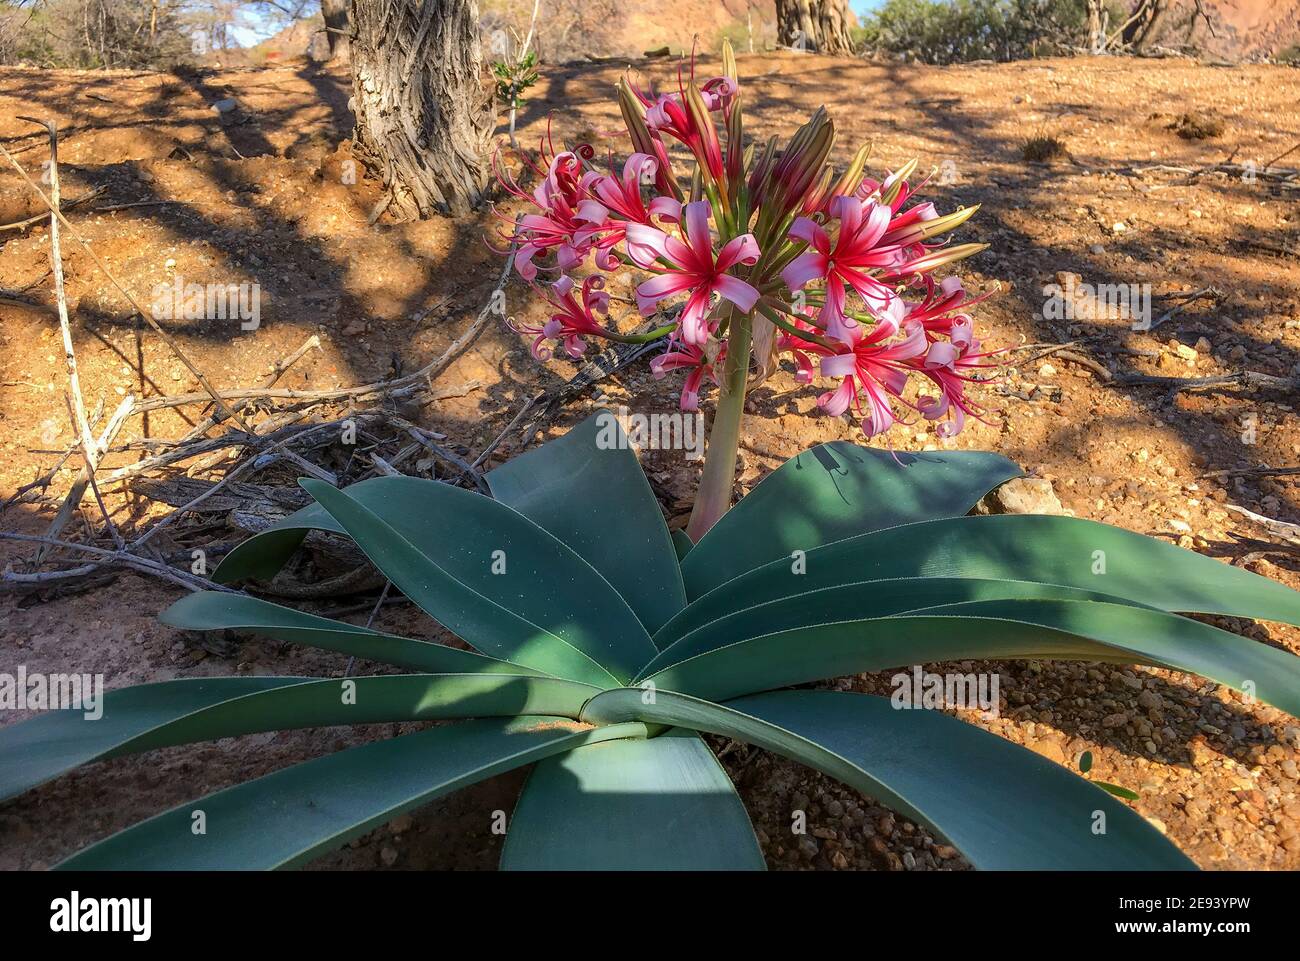 Karoo Lily - Ammocharis coranica, beautiful large flower from Southwest African deserts and bushes, Spitzkoppe, Namibia. Stock Photo